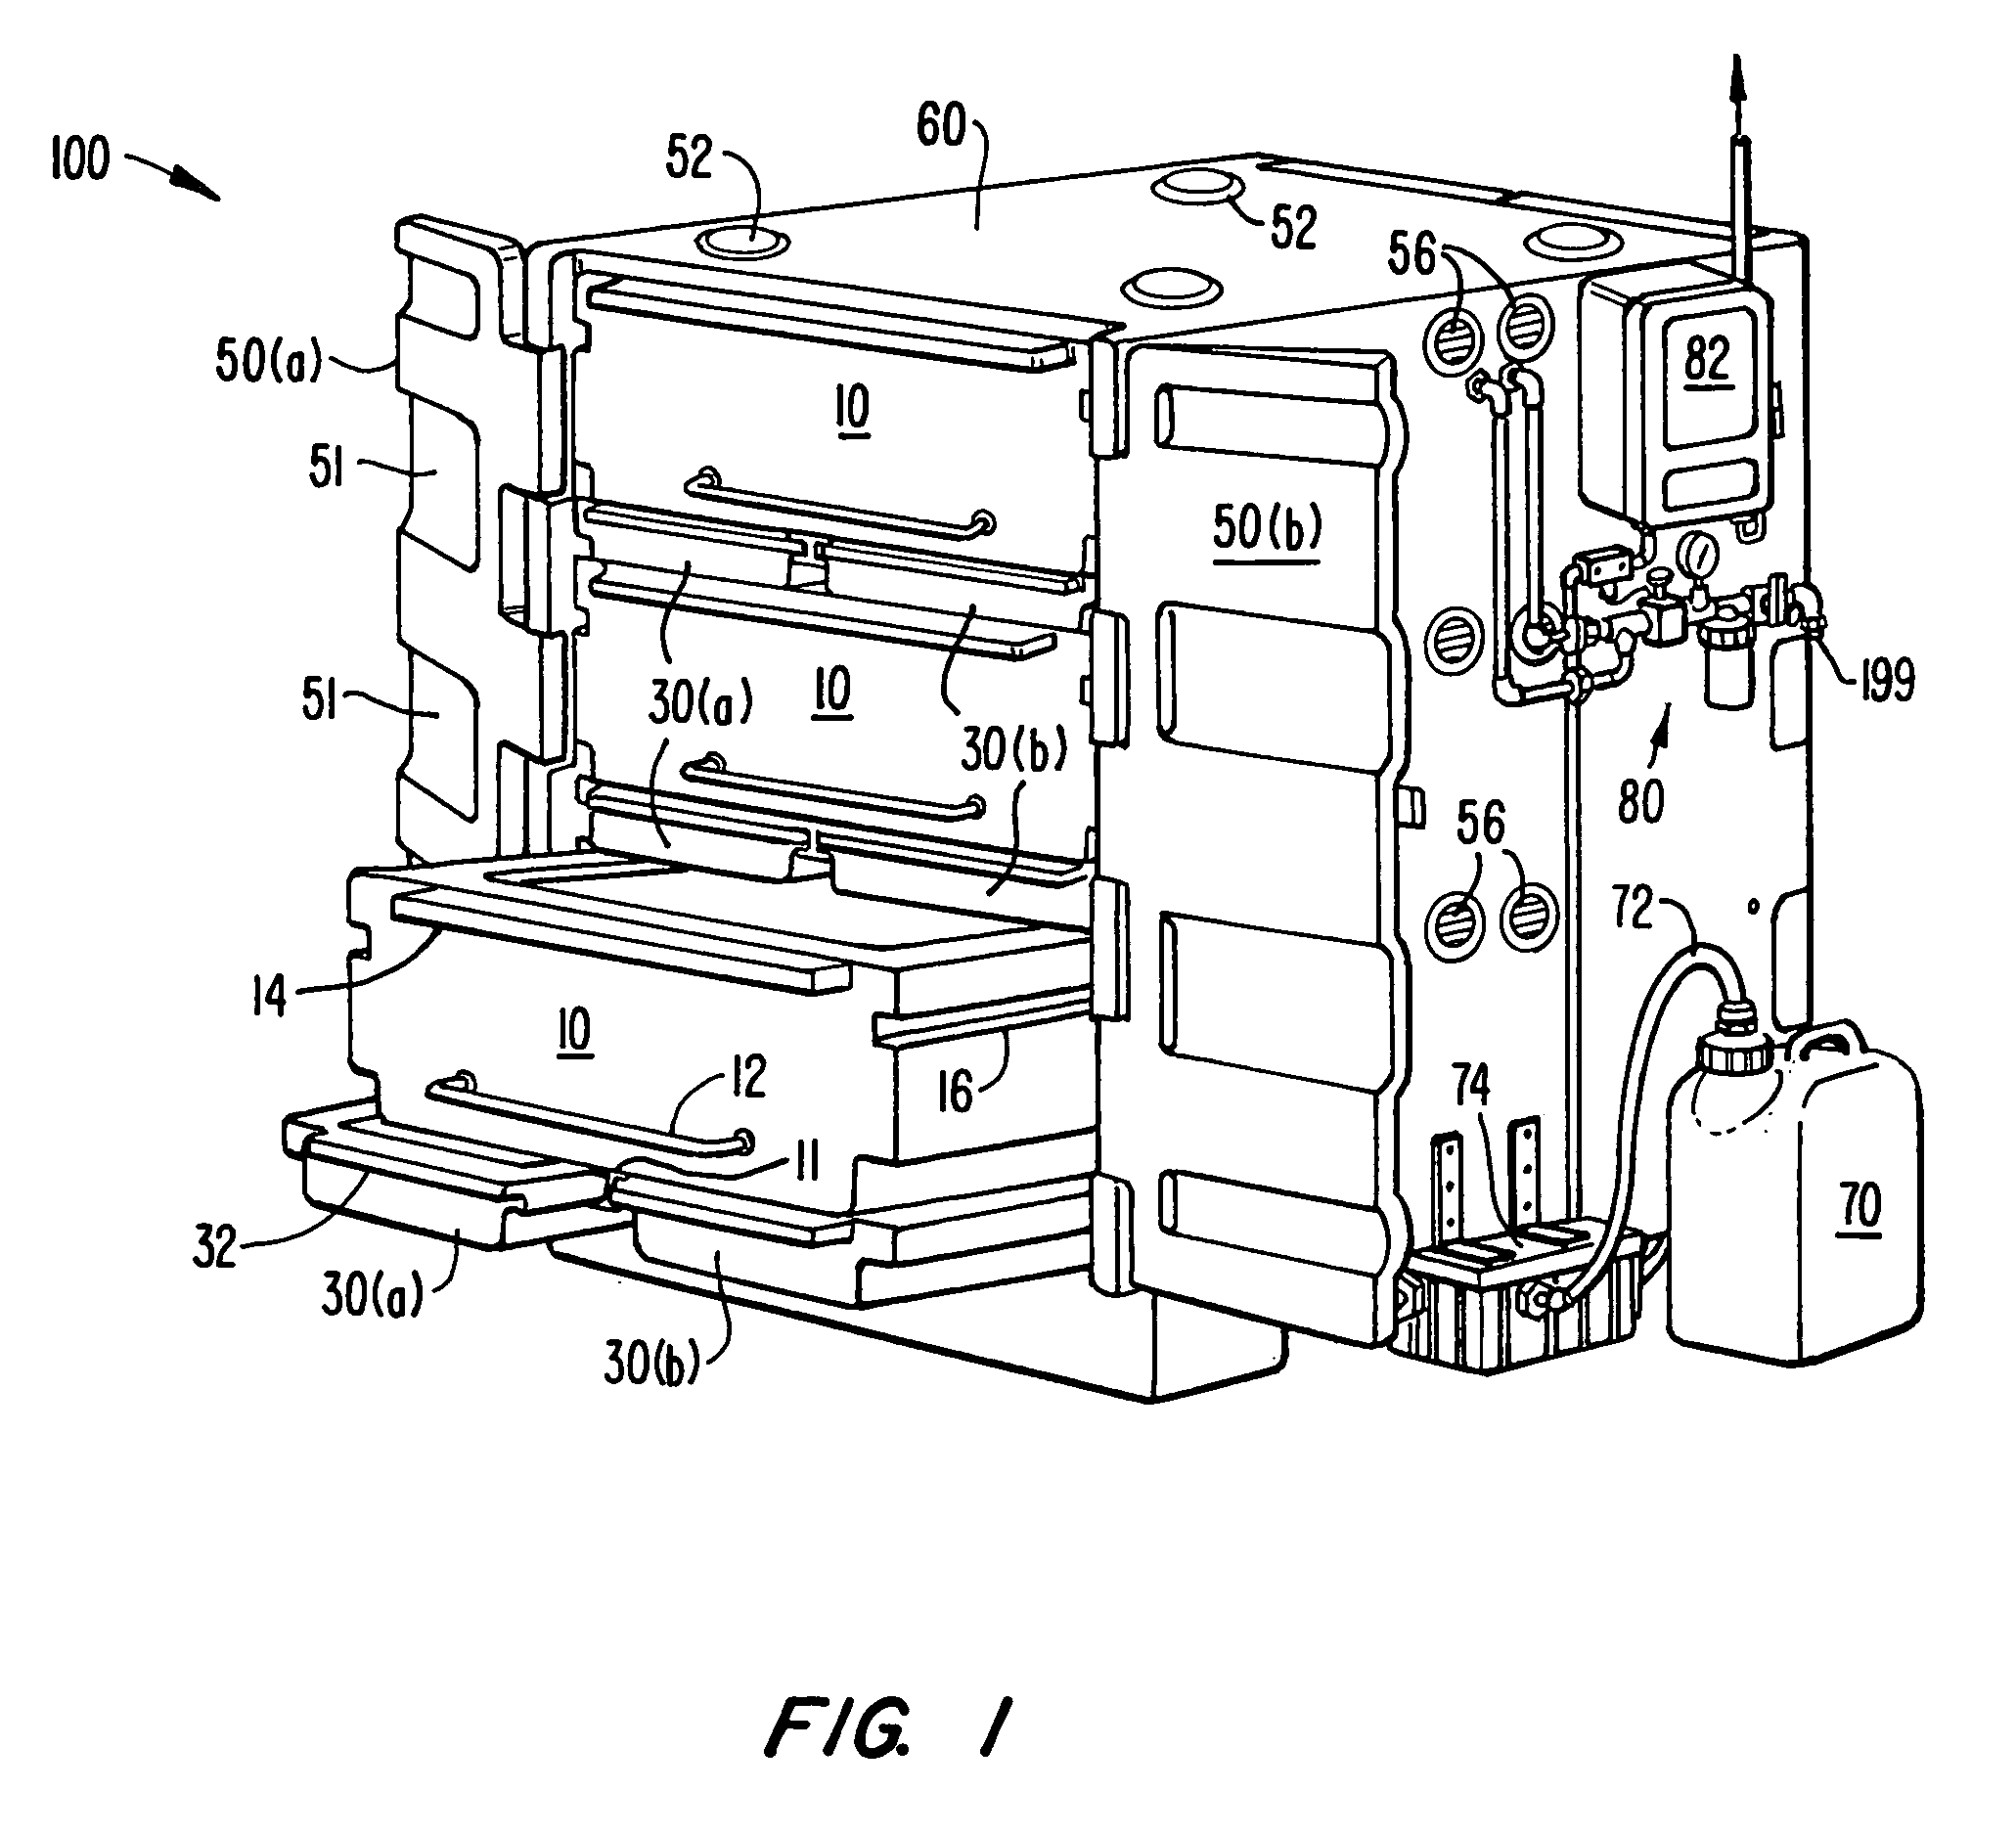 Composting apparatus and method